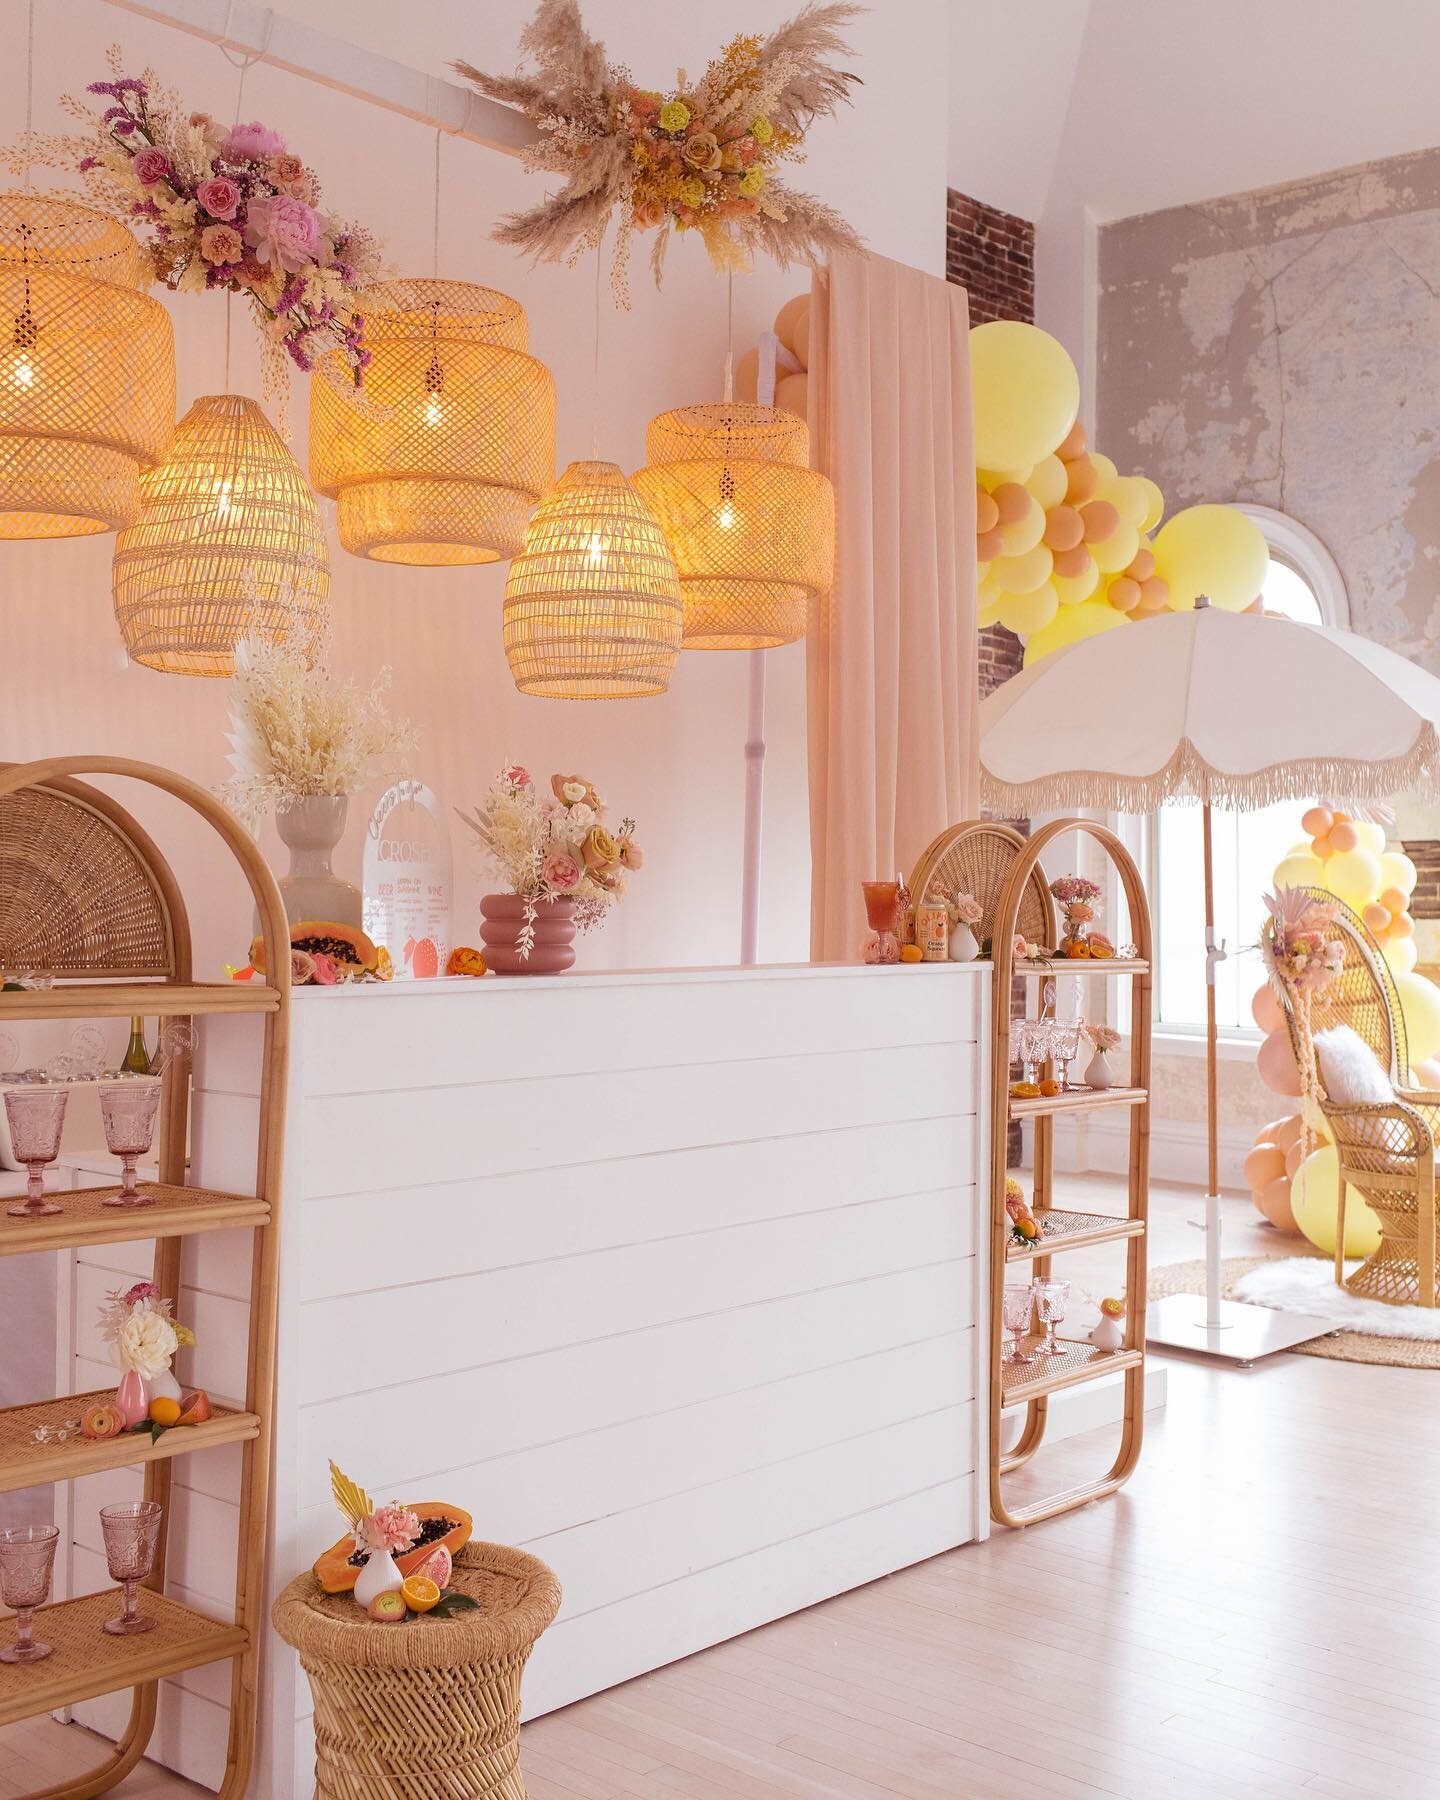 In my next life, I want to come back as Crosby James (and I mean, how cool is her name, too?) All the cute fruity citrus-y goodness on display for this sweet little celebration. I am fully loving this color palette and styling with fruit is always a 